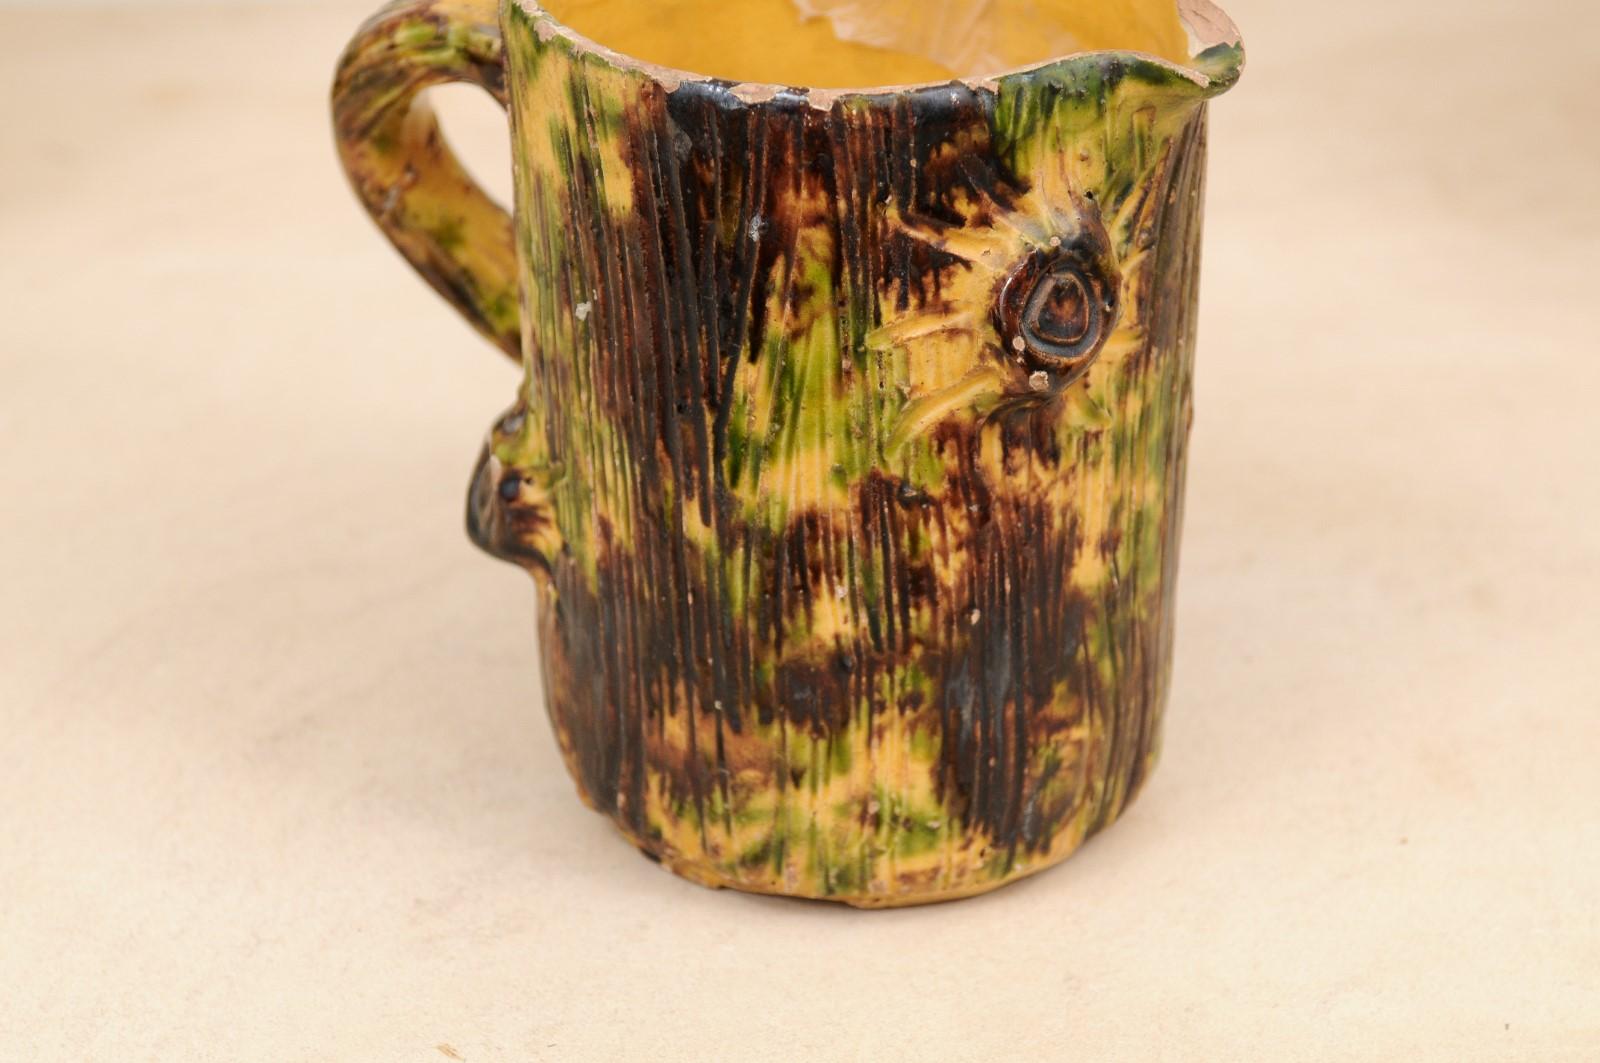 19th Century French Brown Glazed Pottery Pitcher with Yellow and Green Textured Accents